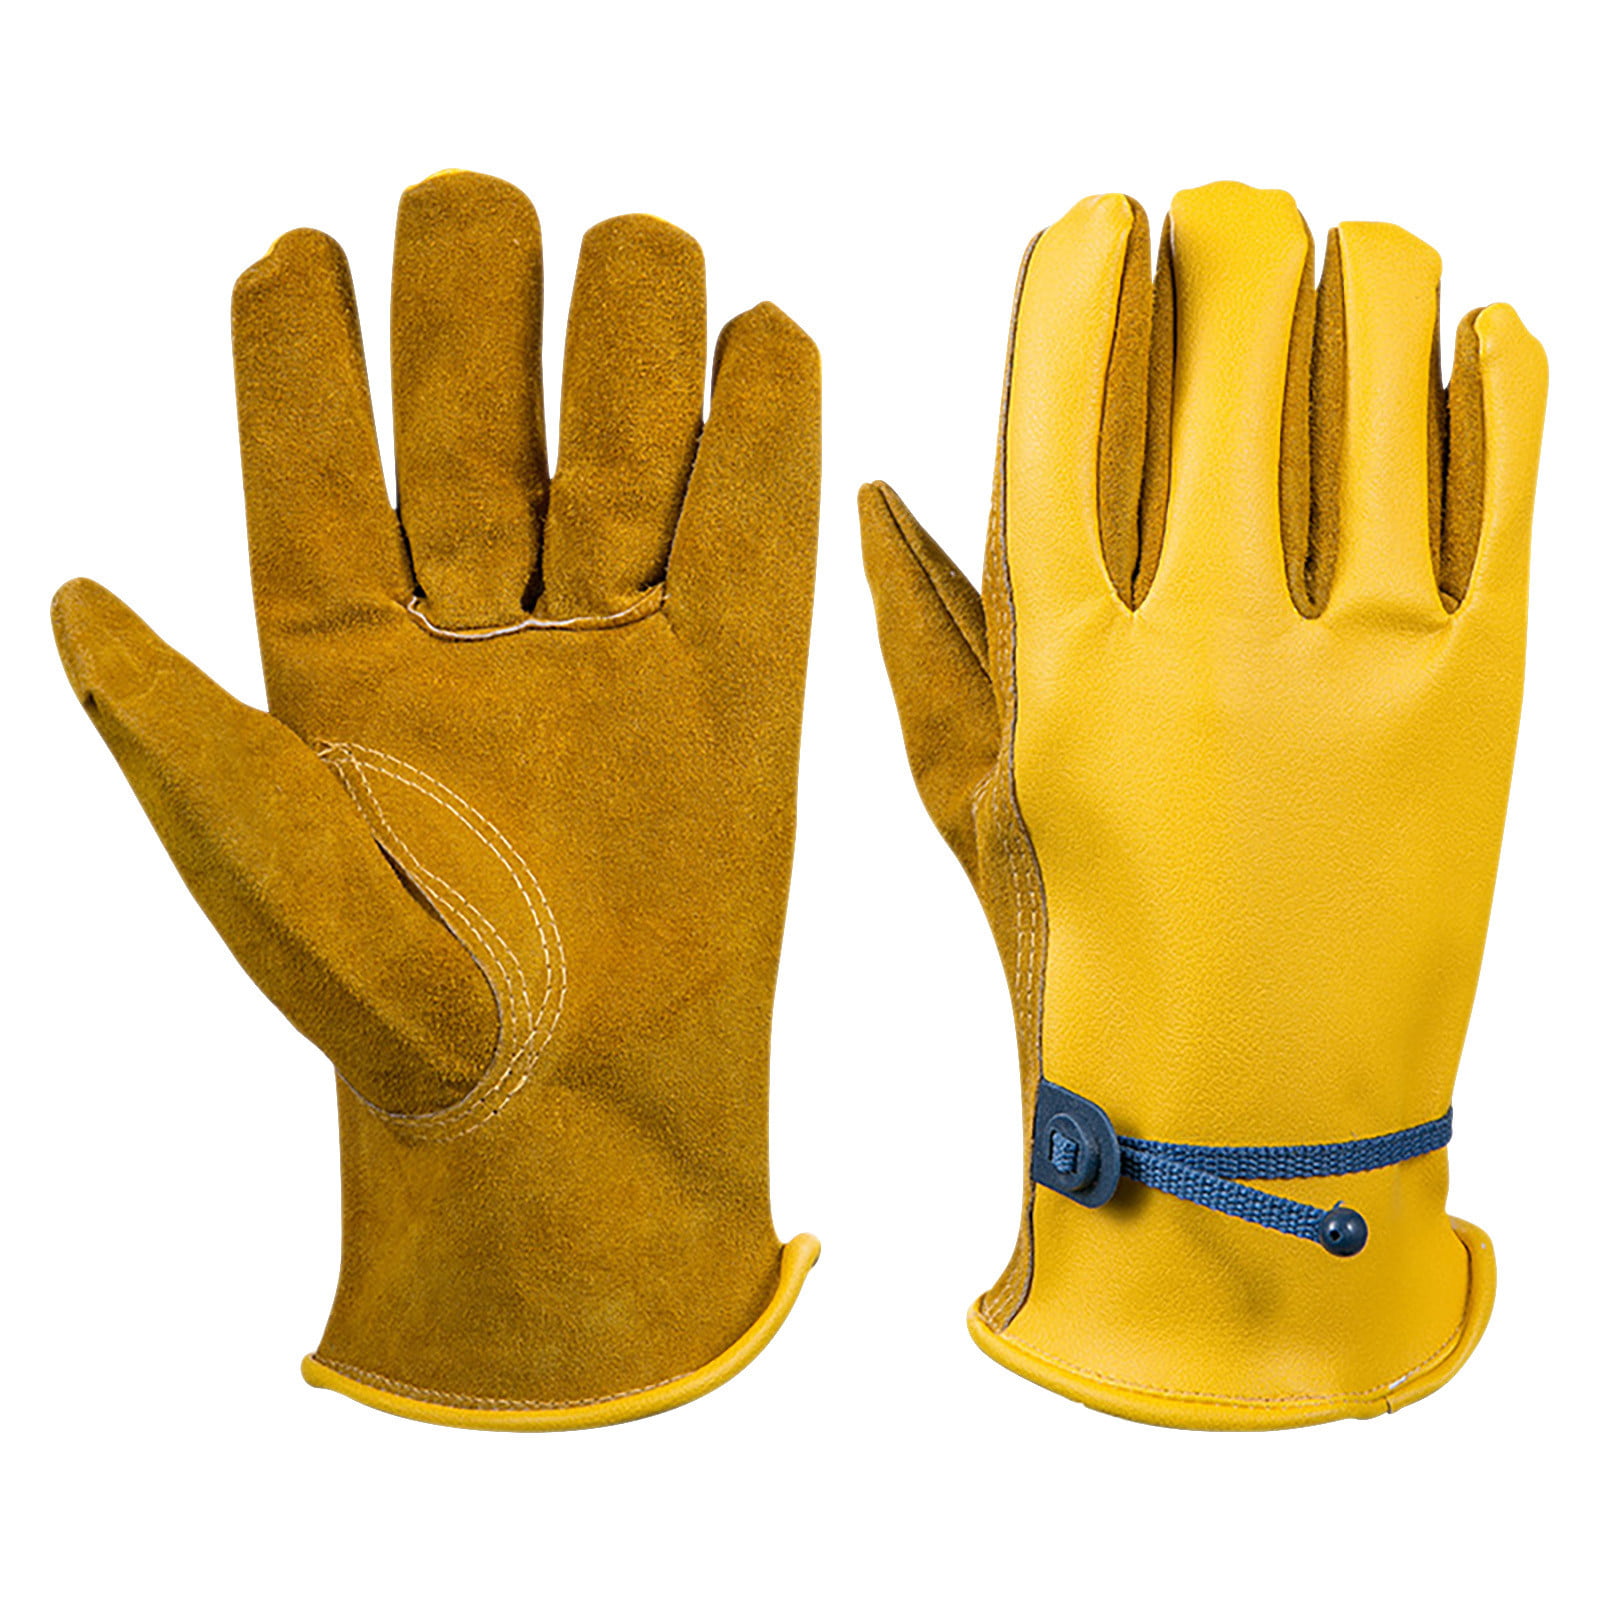 Safety Work Gloves Heavy duty  Mechanic Gardening Builders Cut Hand Protection 